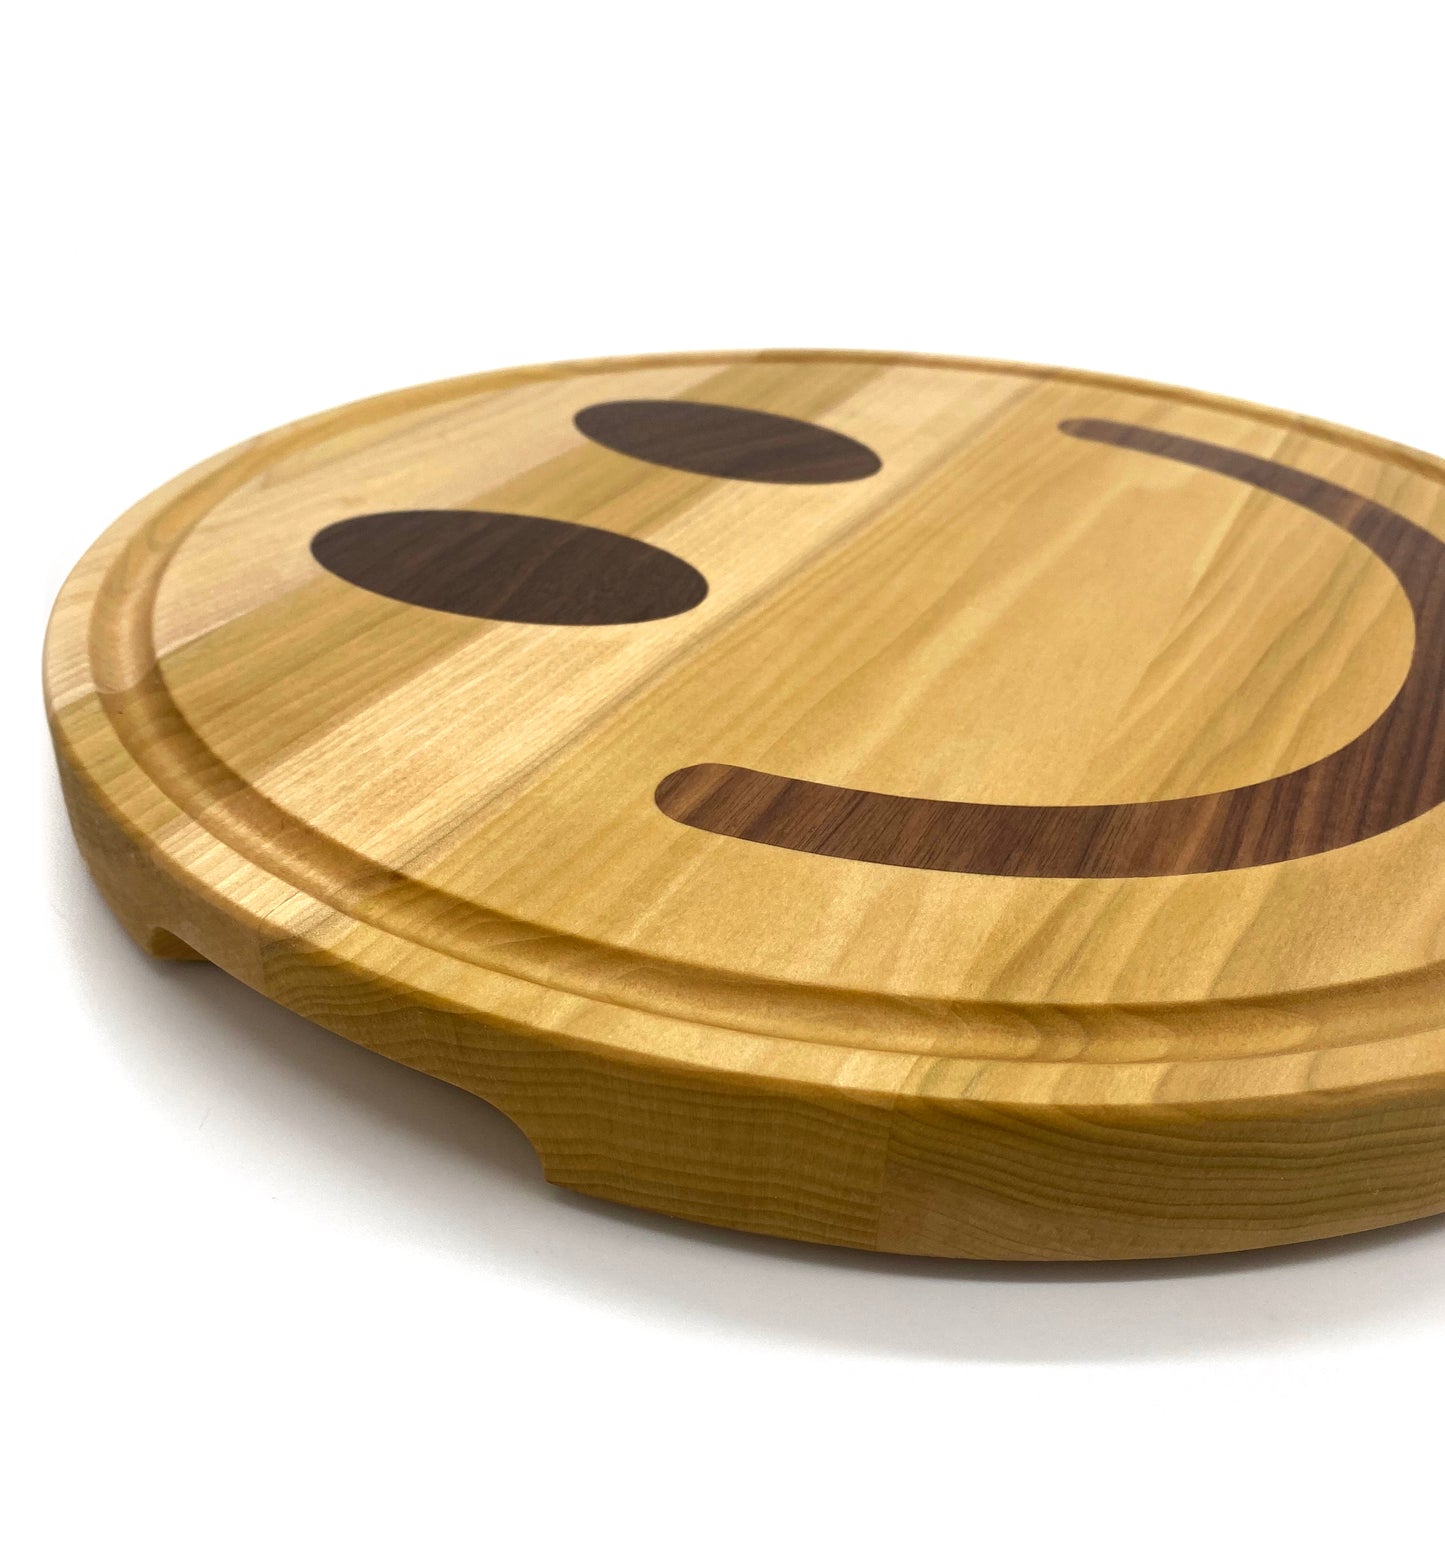 smiley face shapes cutting board made of poplar